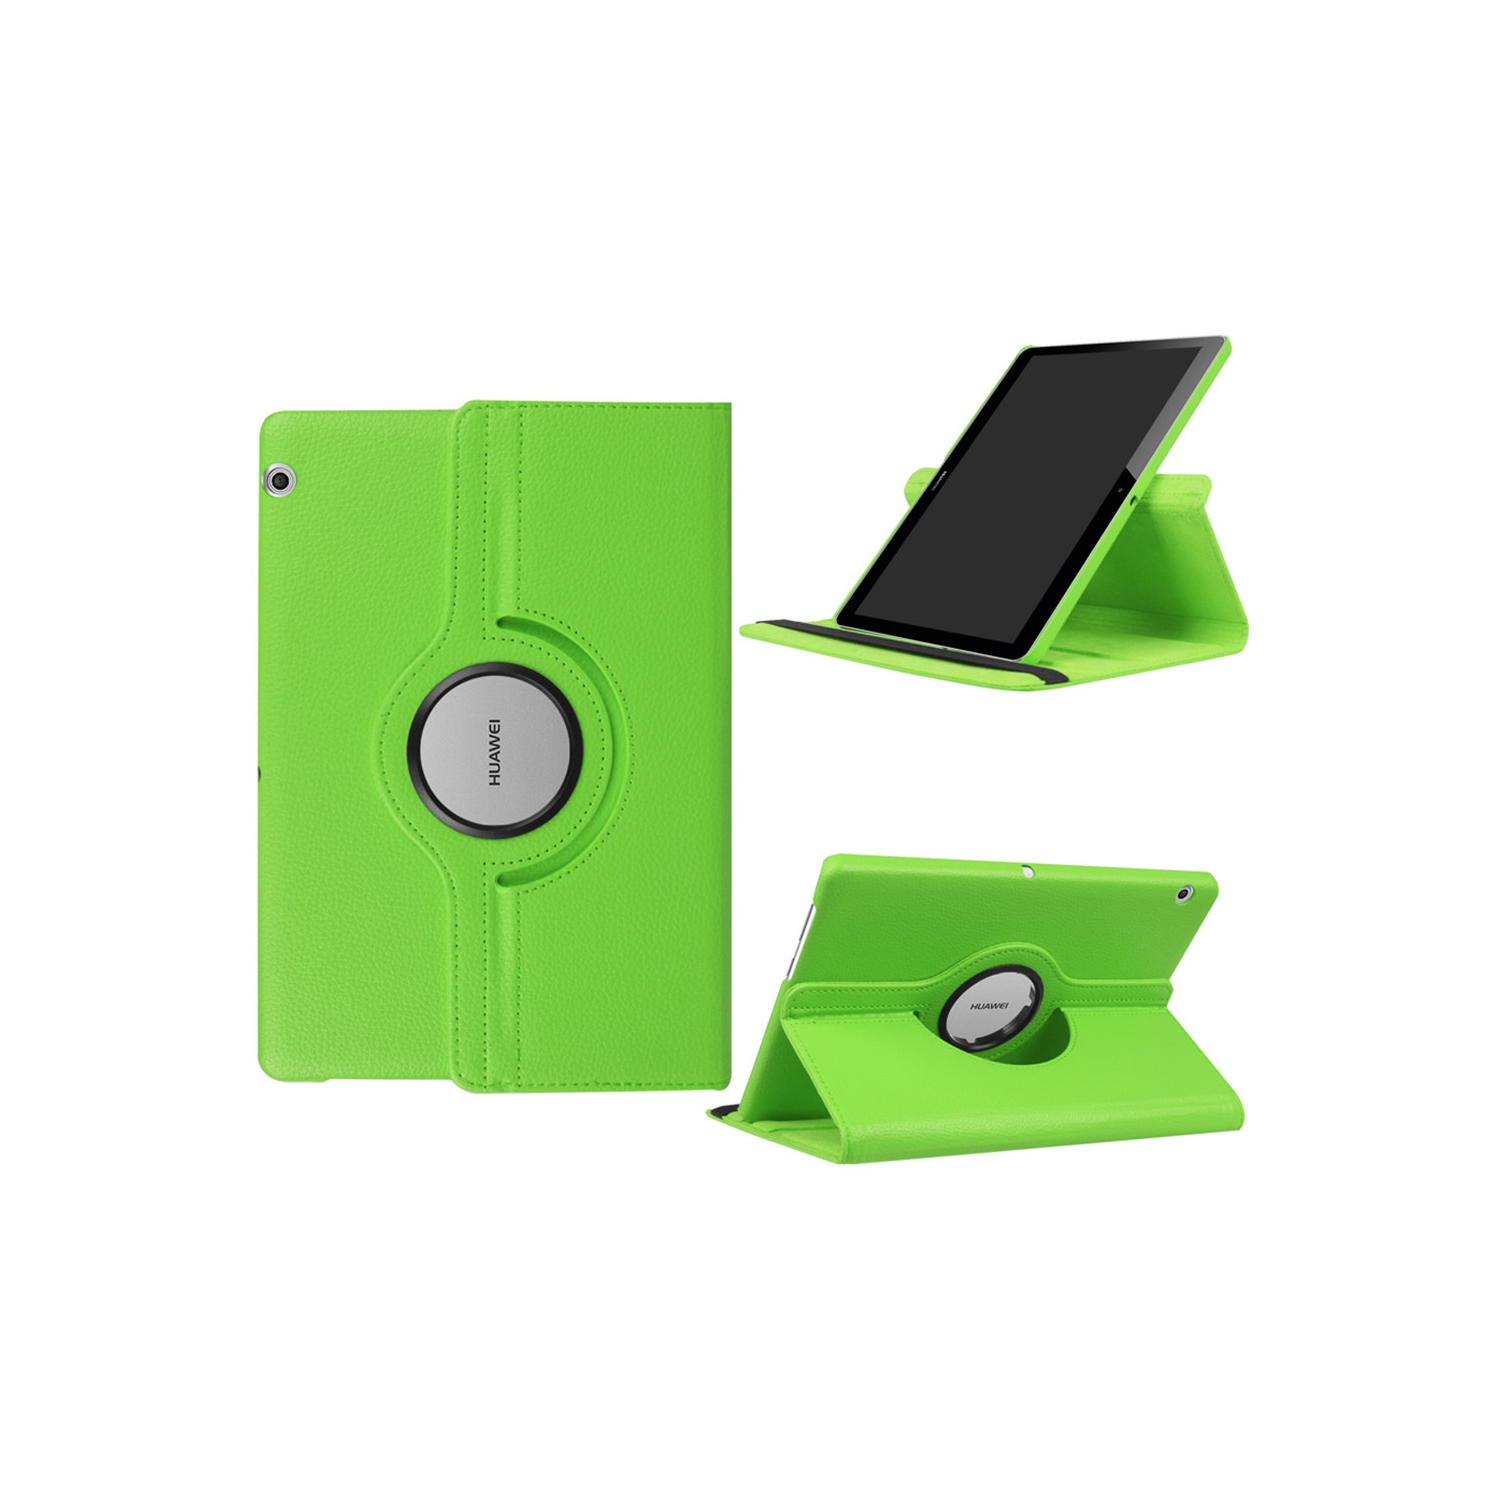 【CSmart】 360 Rotating PU Leather Stand Case Smart Cover for Huawei Mediapad T5 10 10.1", Green